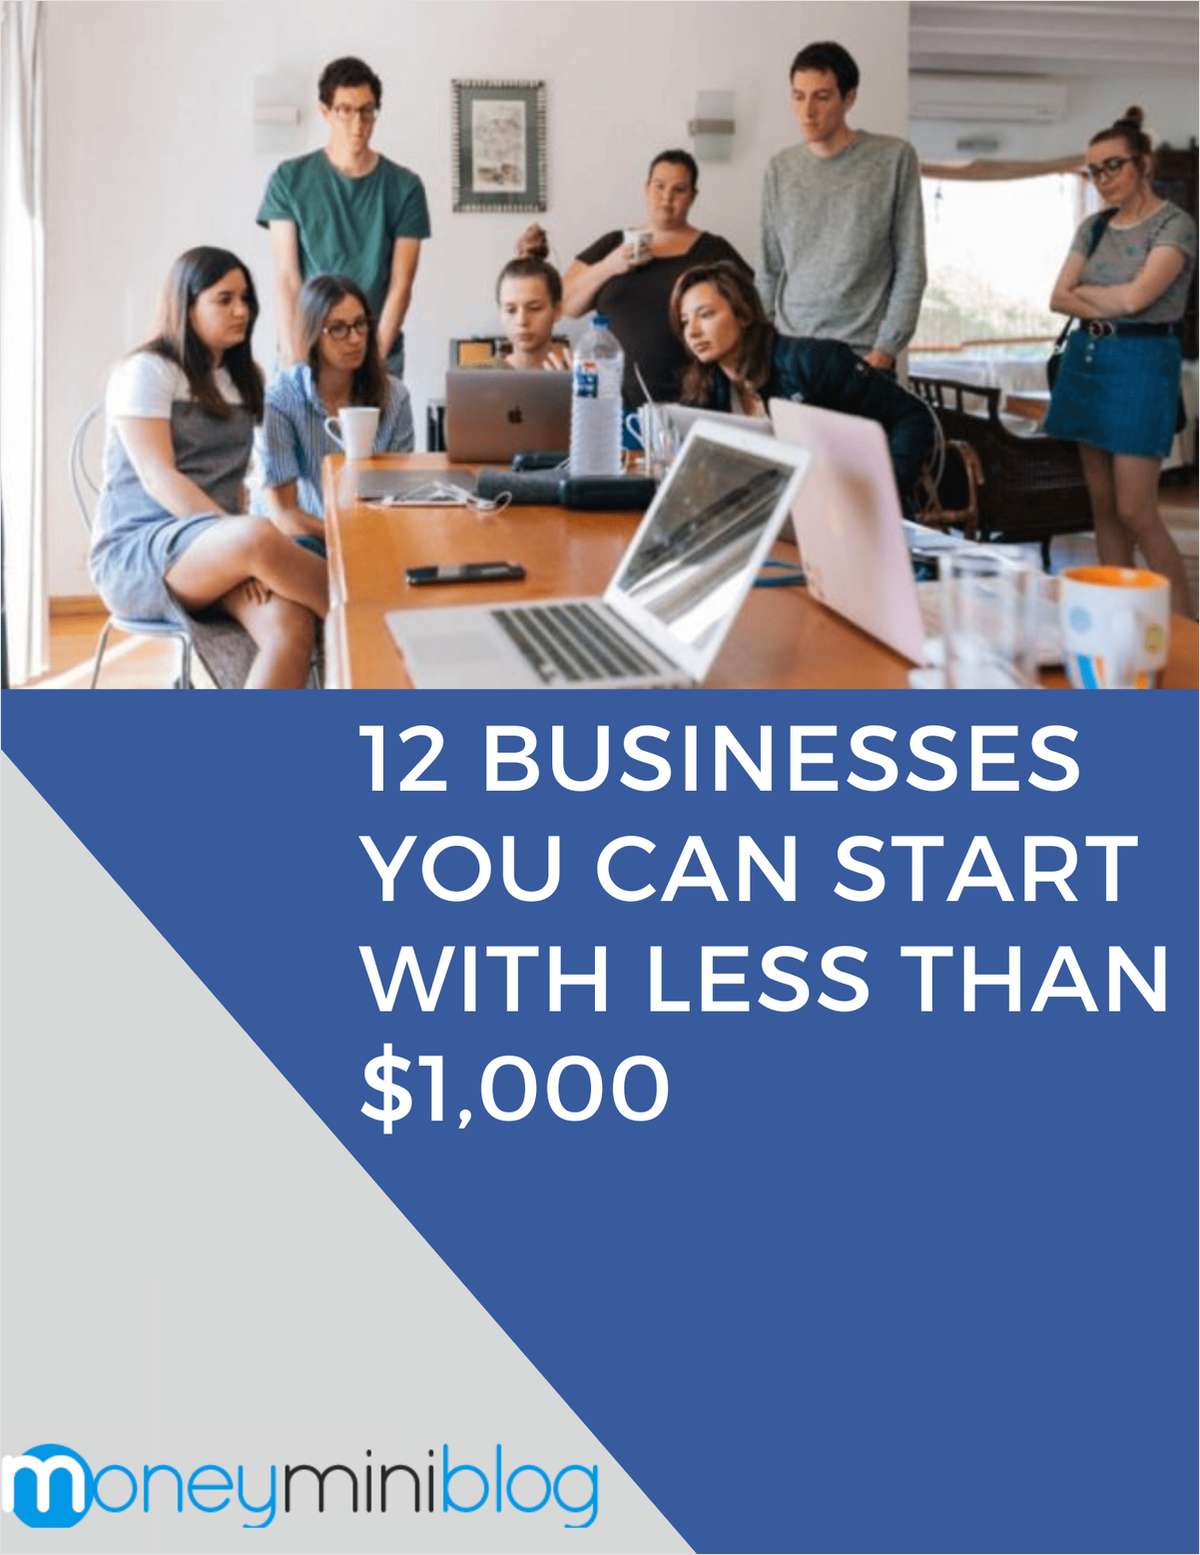 12 Businesses You Can Start With Less Than $1,000